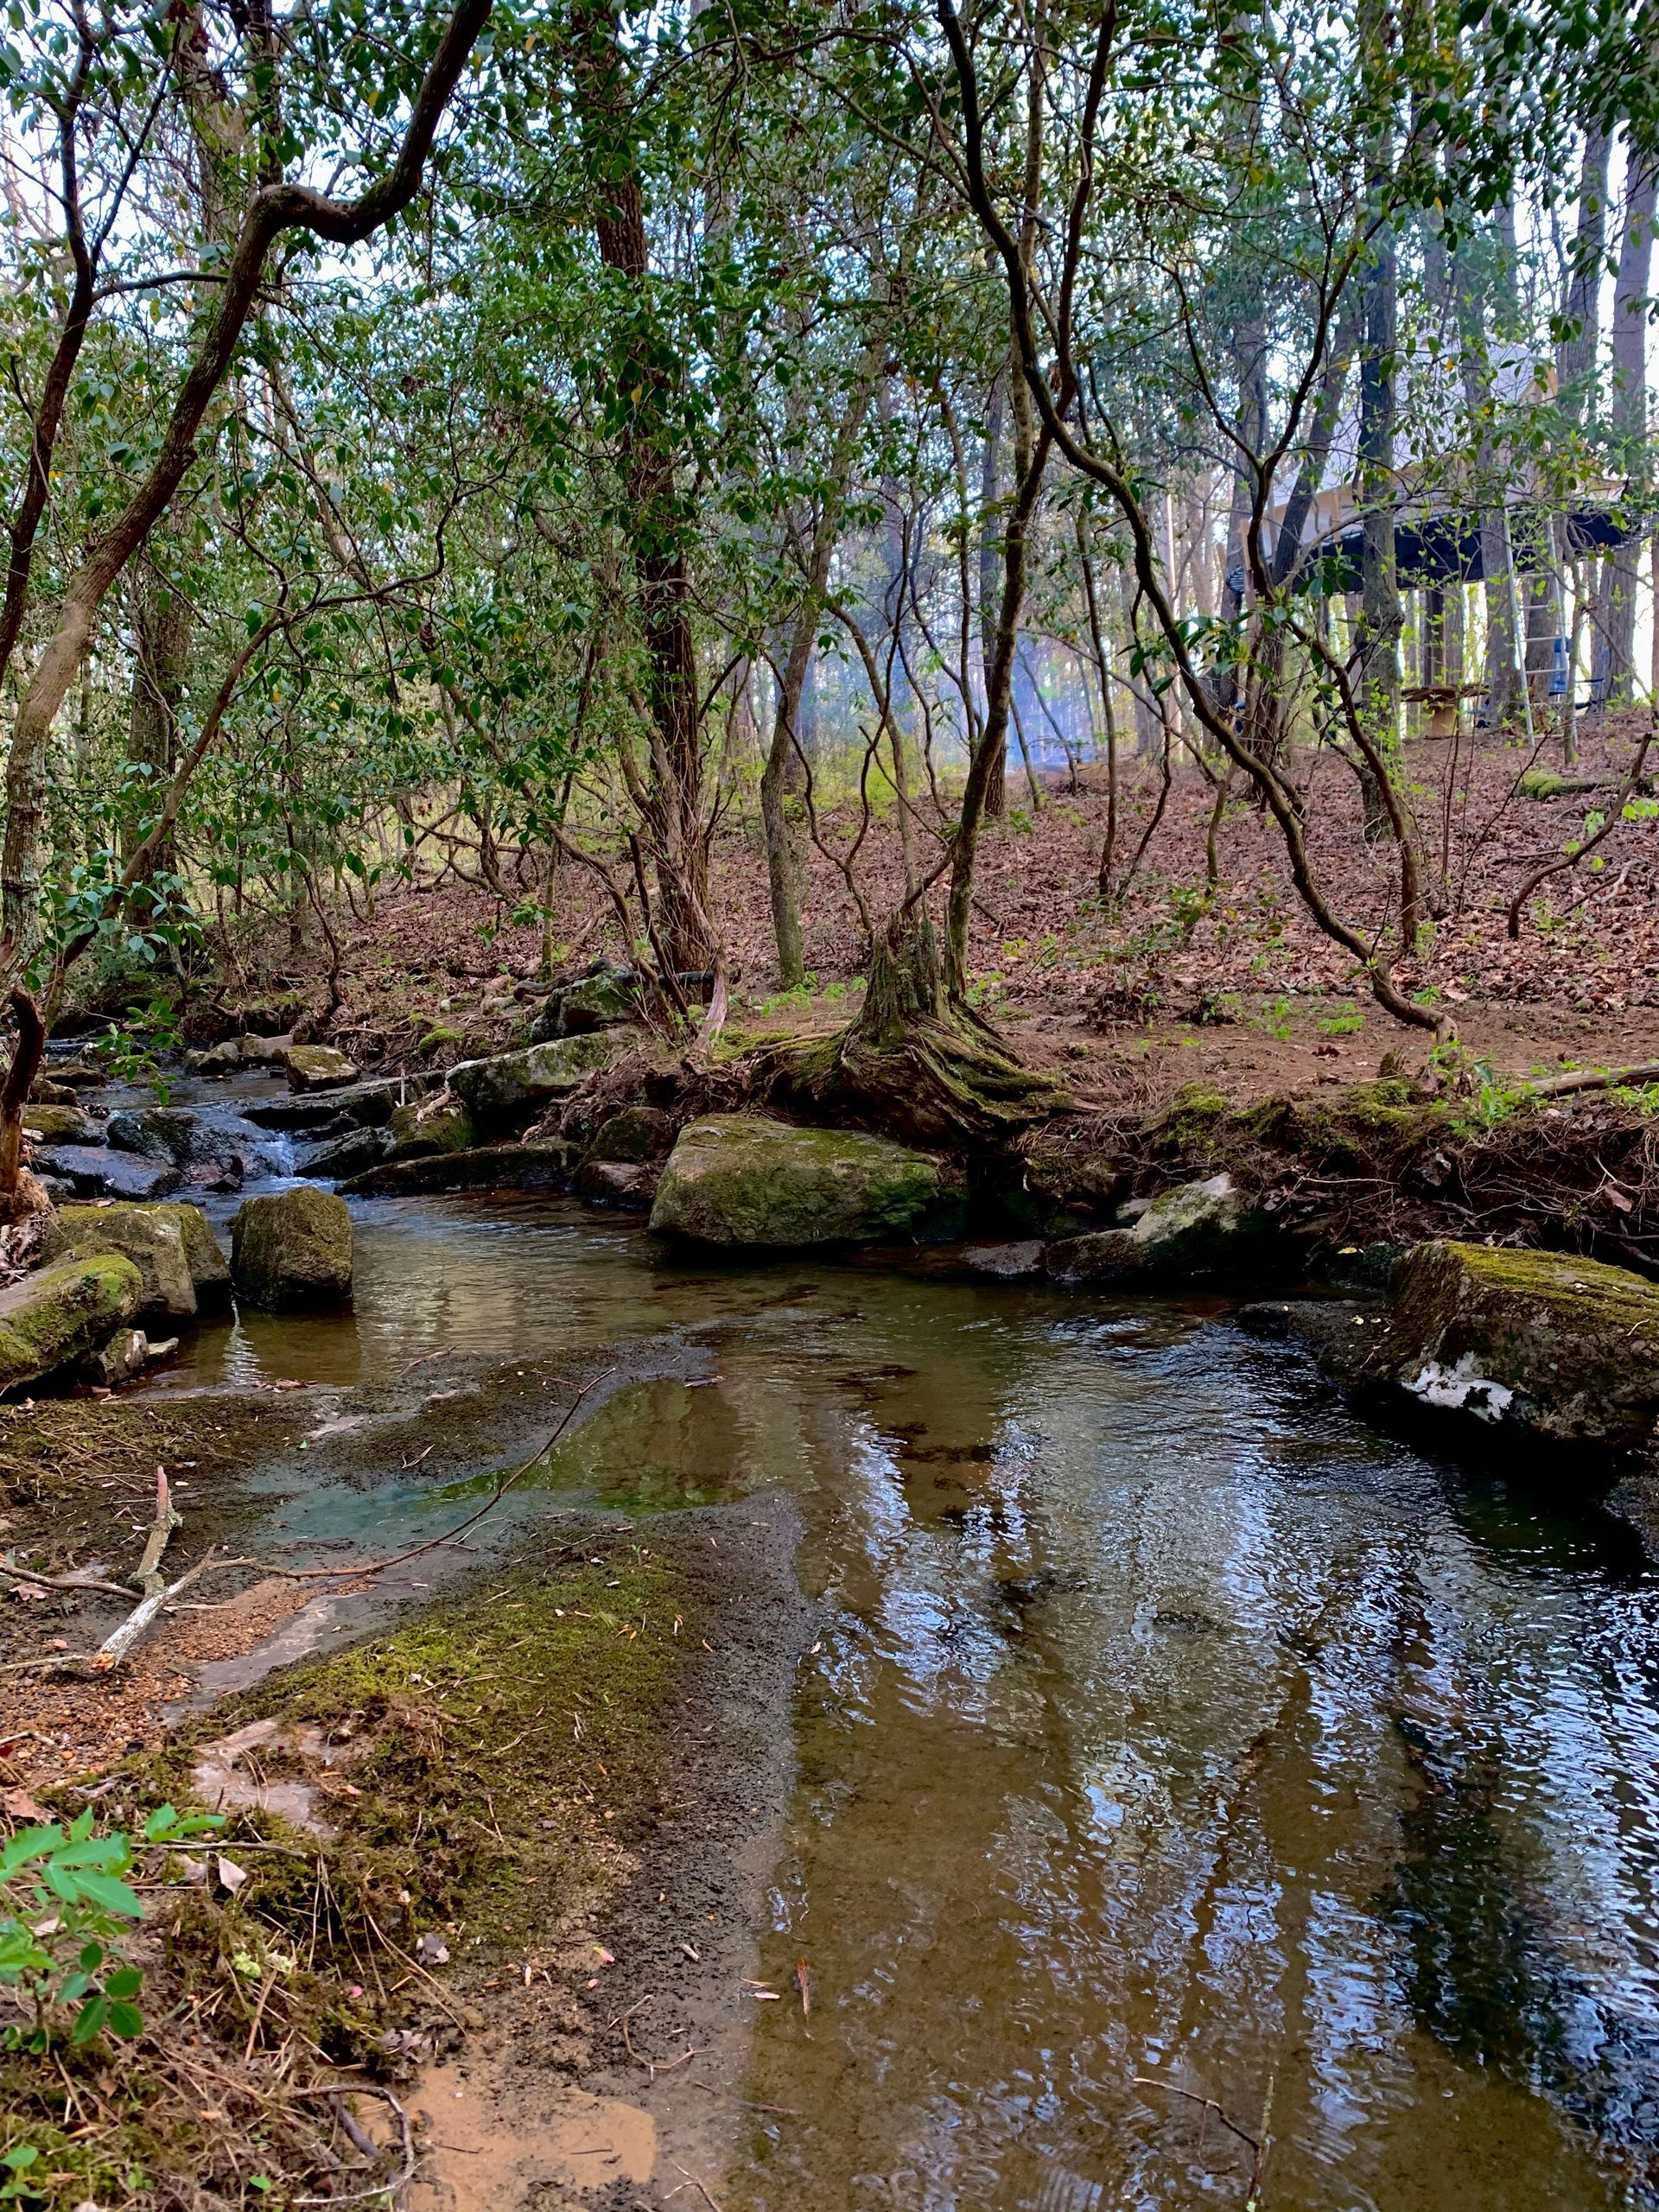 A small stream in the middle of a forest surrounded by trees.